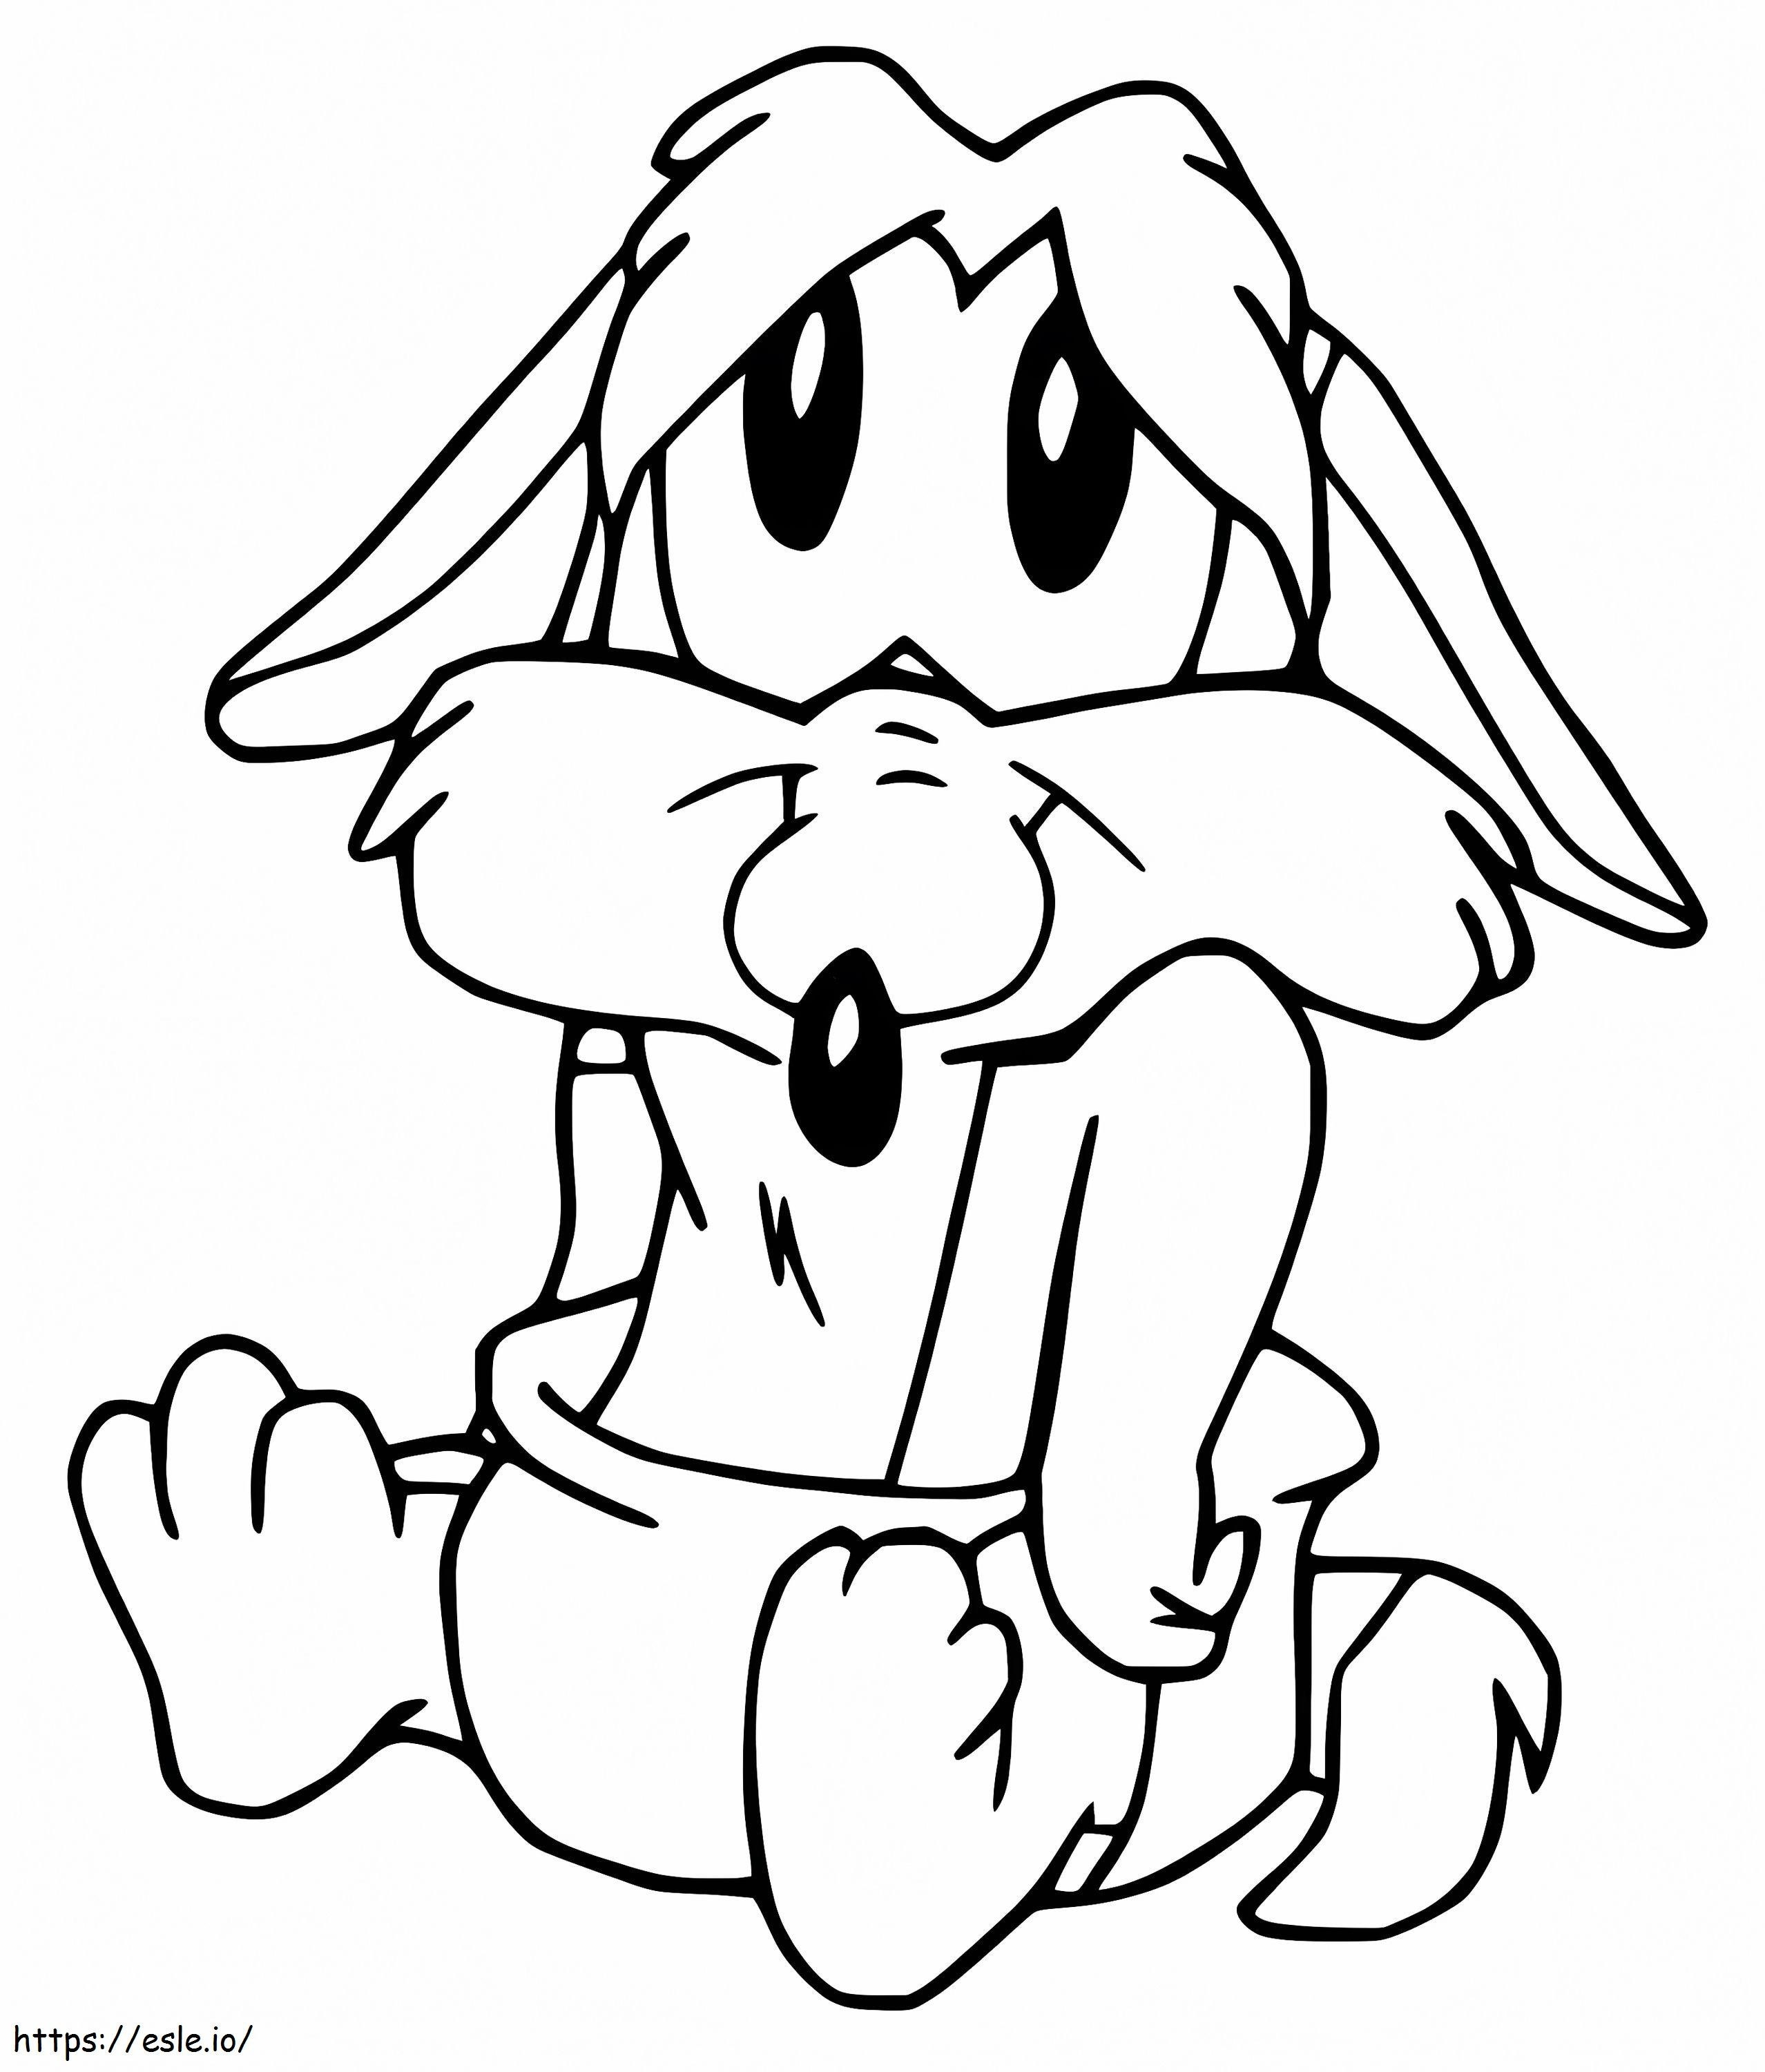 Sad Baby Wile E Coyote coloring page